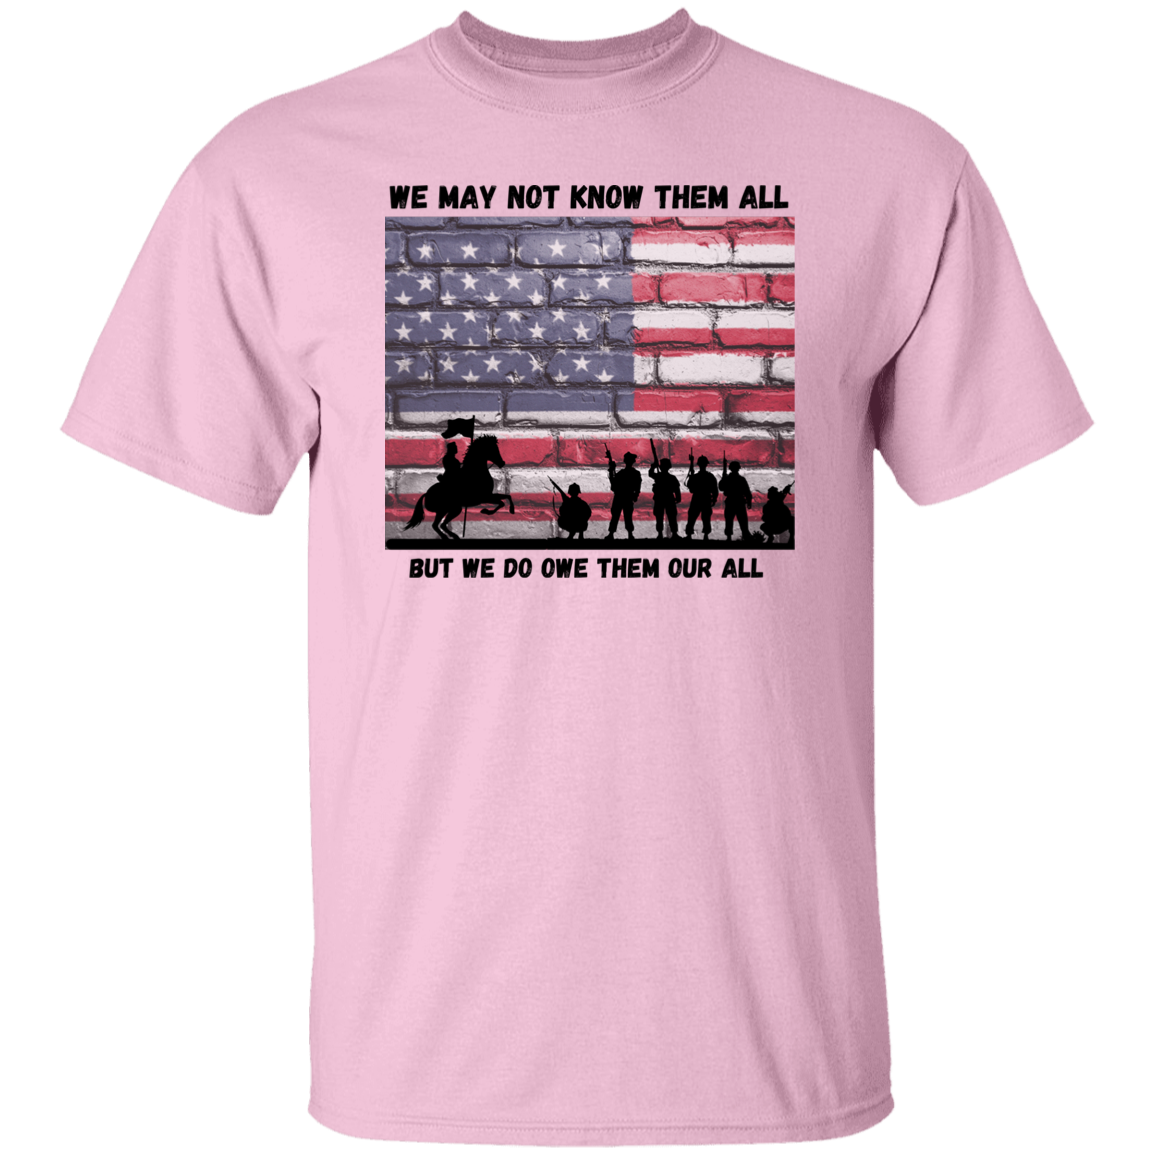 We May Not Know Them All But We Do Owe Them Our All Men's Women's T-Shirt Memorial Day